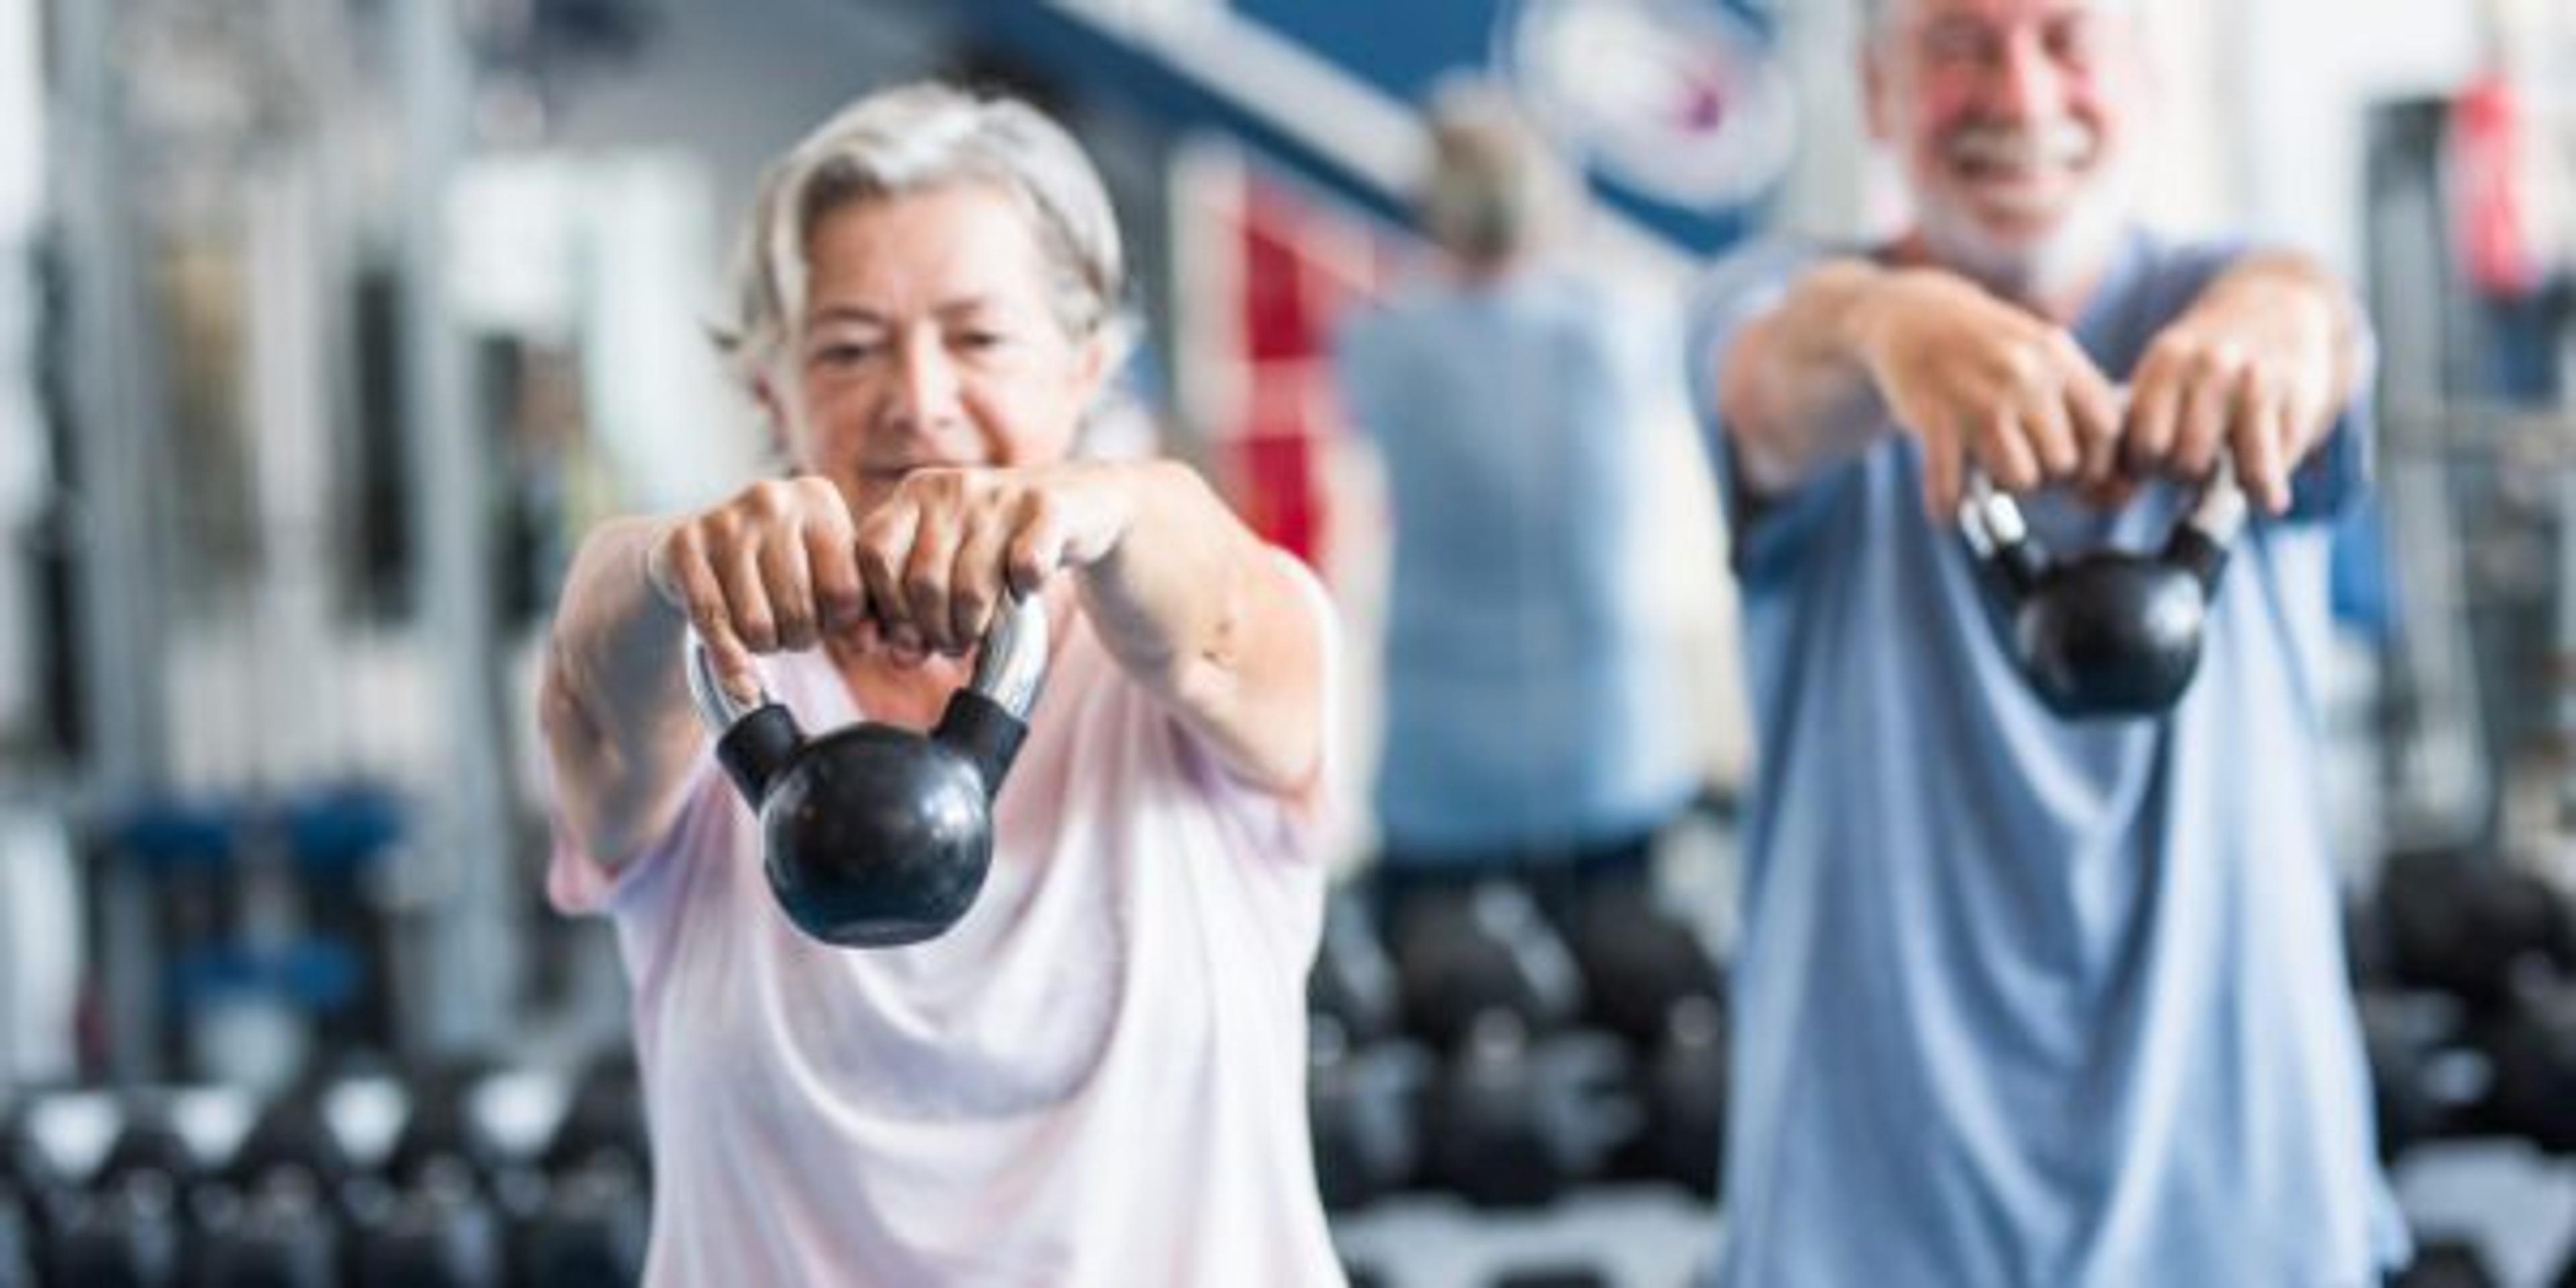 5 Exercises That The Elderly Must Do At Home To Maintain Good